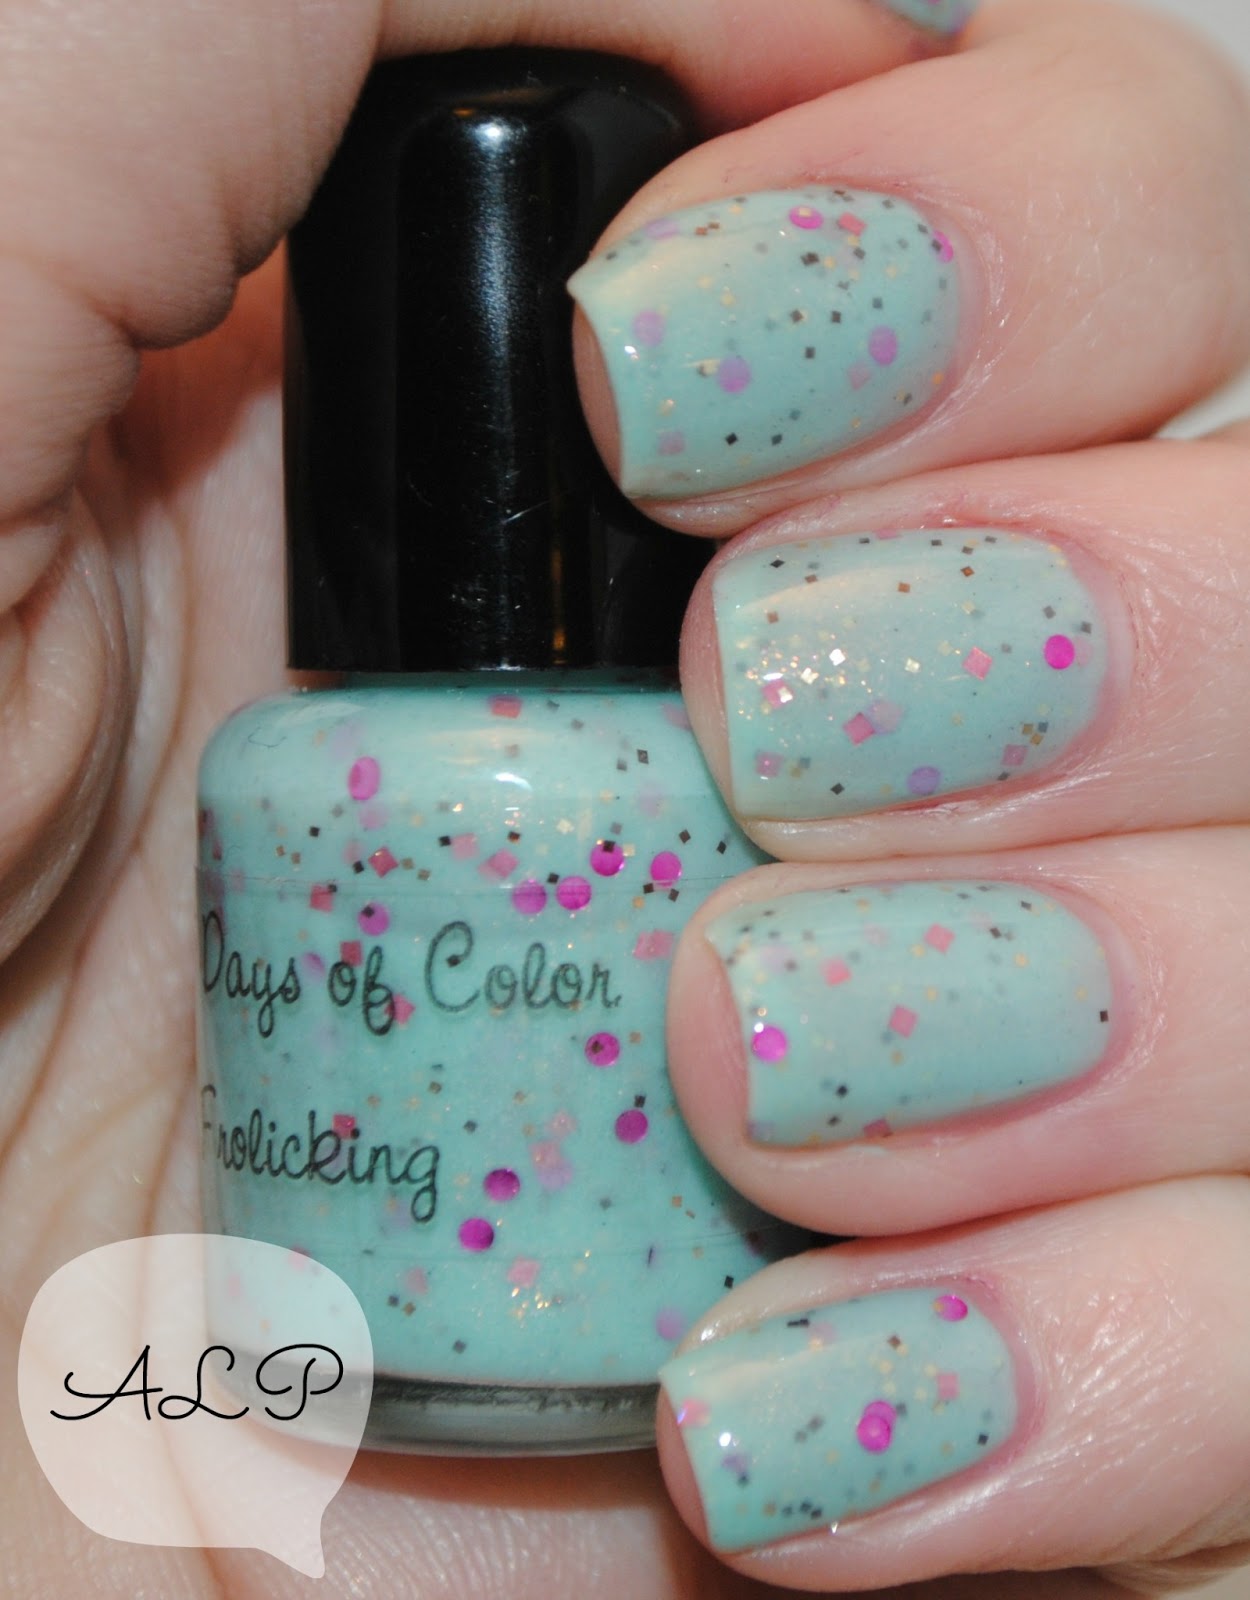 A Little Polish: 365 Days of Color - Frolicking